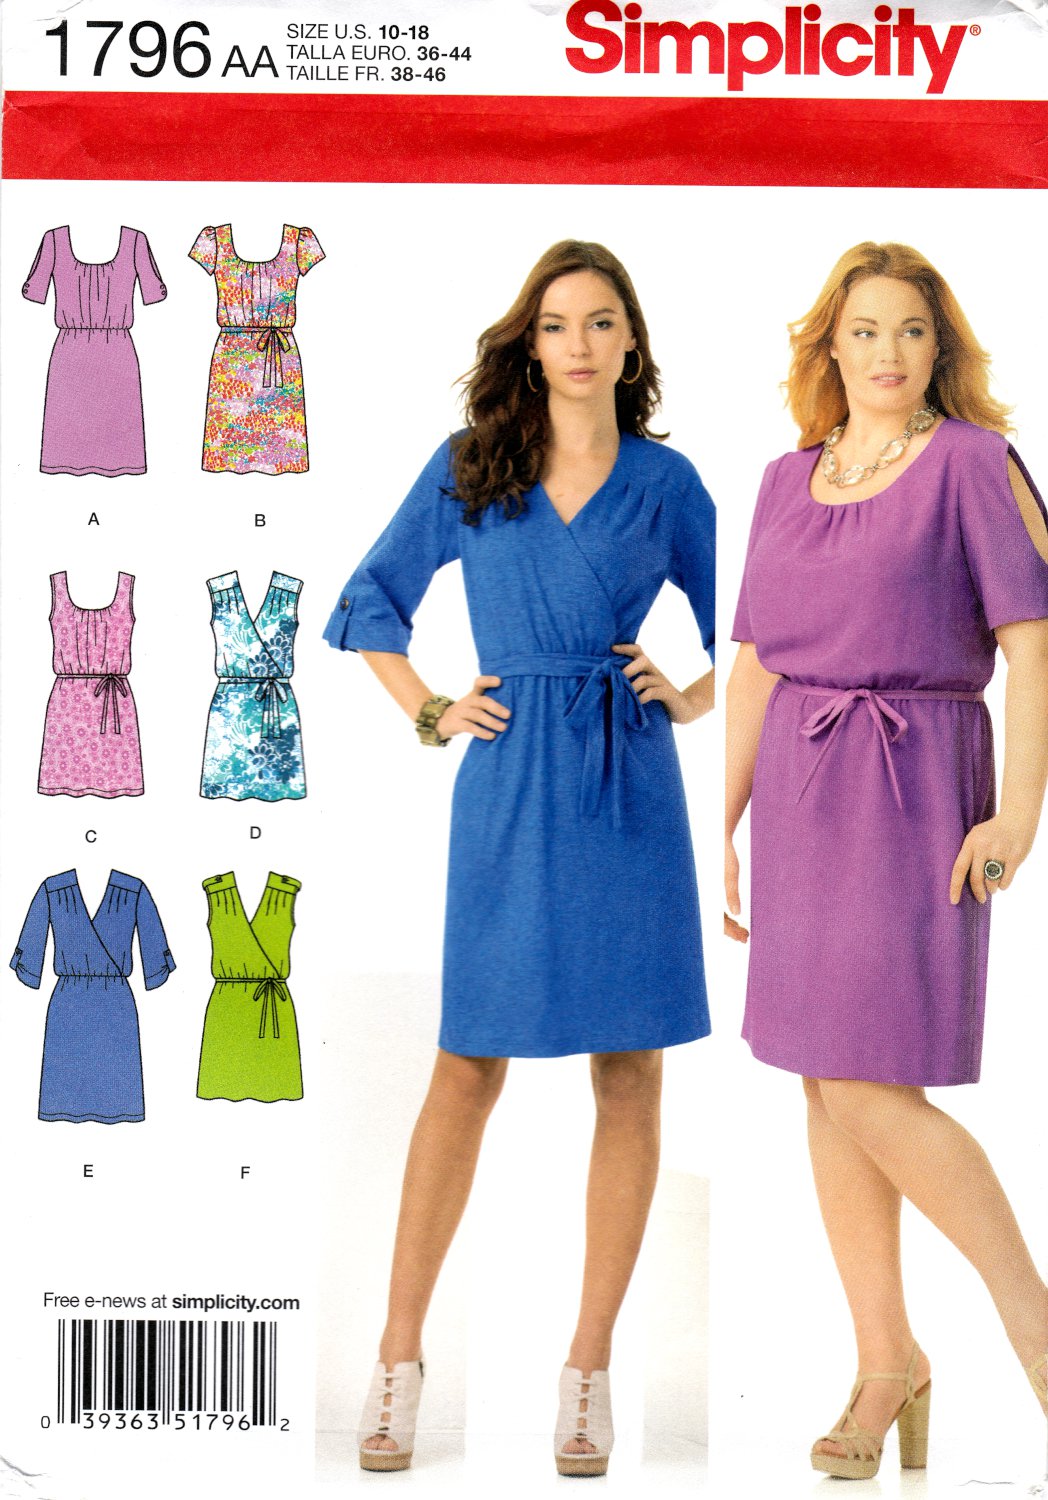 Simplicity 1796 Misses Womens Pullover Dress Two Lengths Belts Variations Sewing Pattern Sizes 10-18